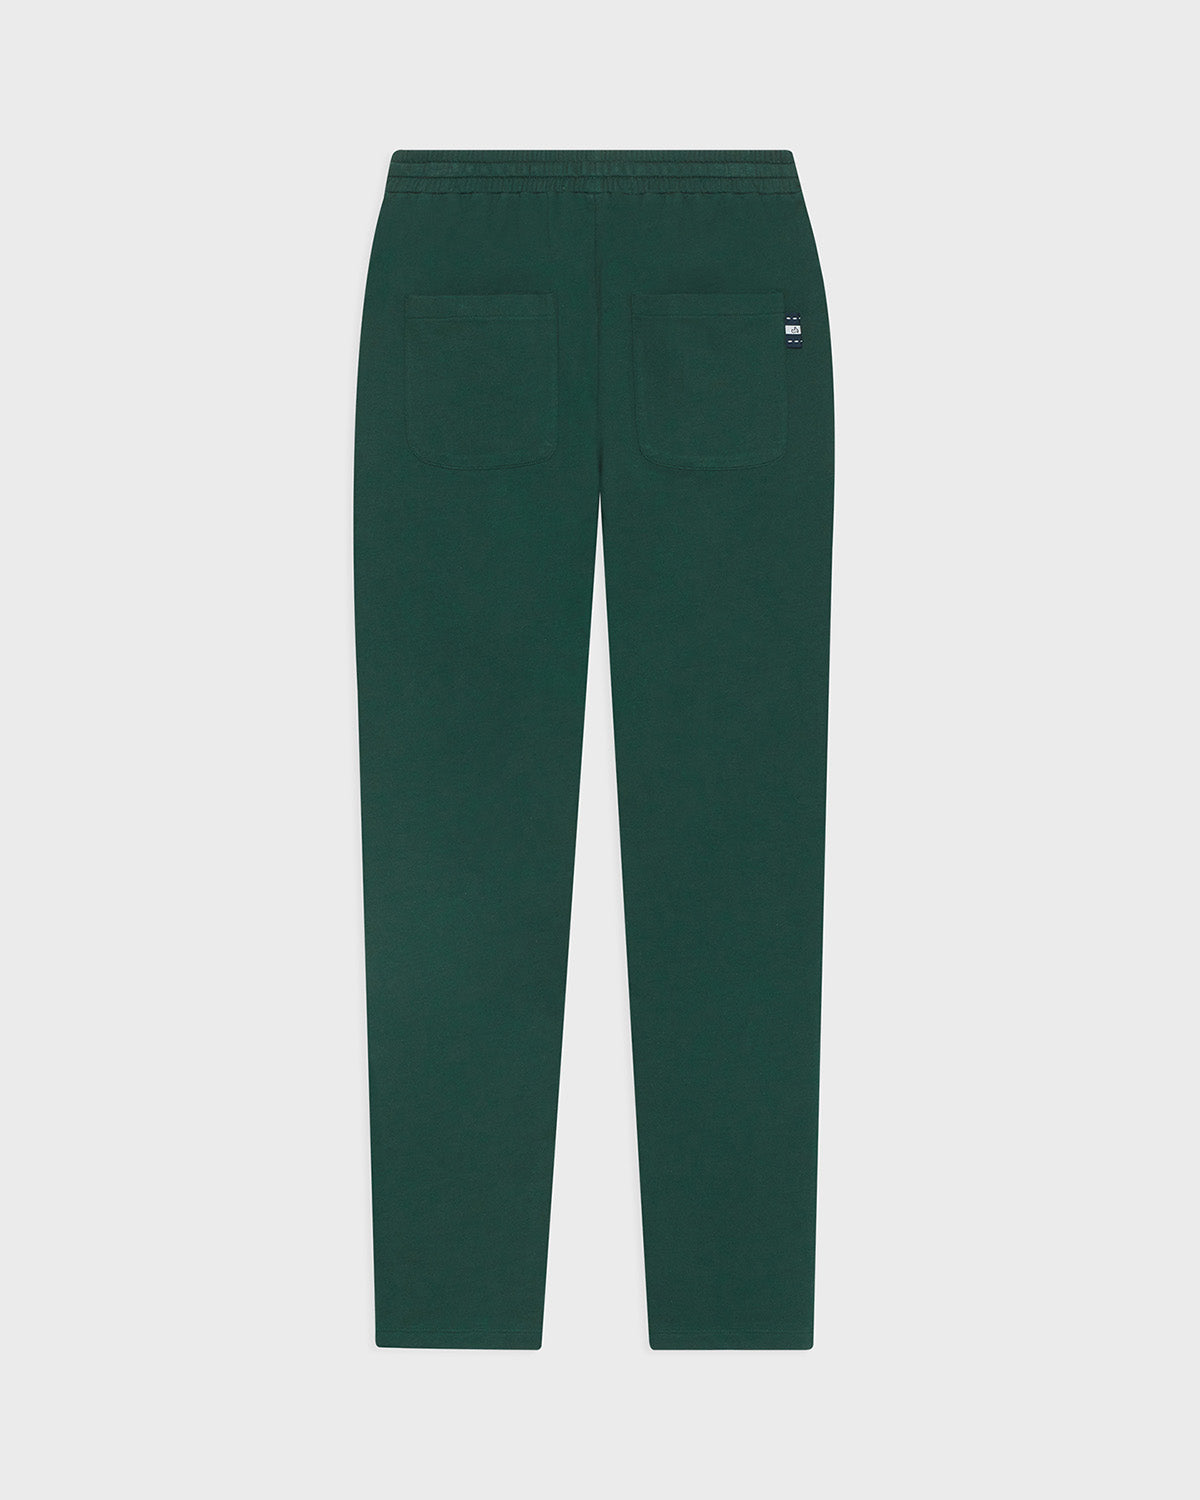 FRENCH TERRY SWEATPANTS